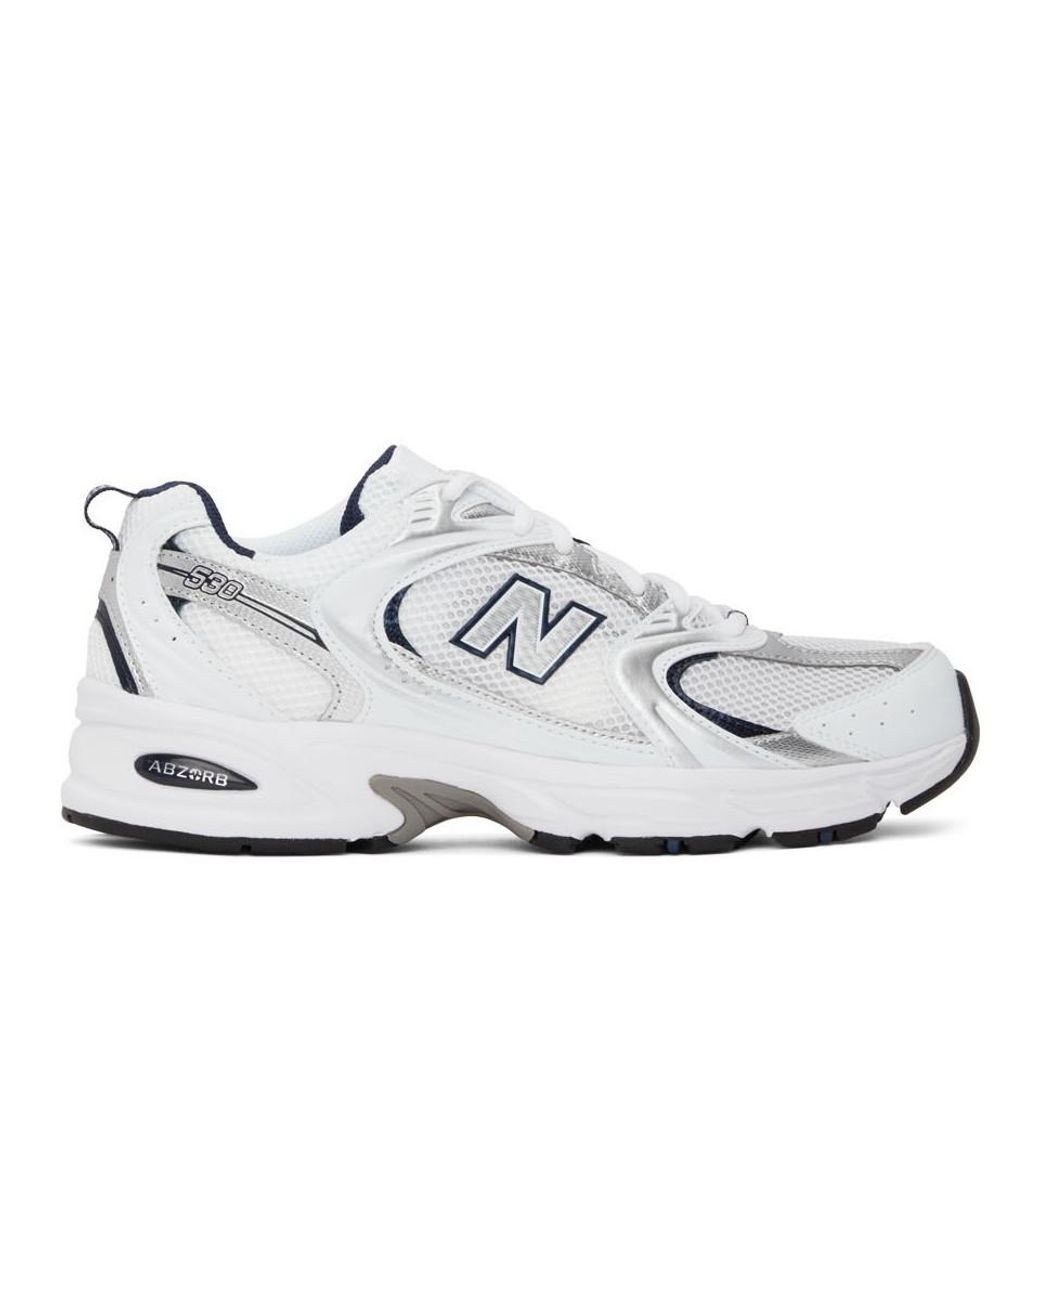 New Balance Rubber Silver And White 530 Sneakers in Metallic - Lyst